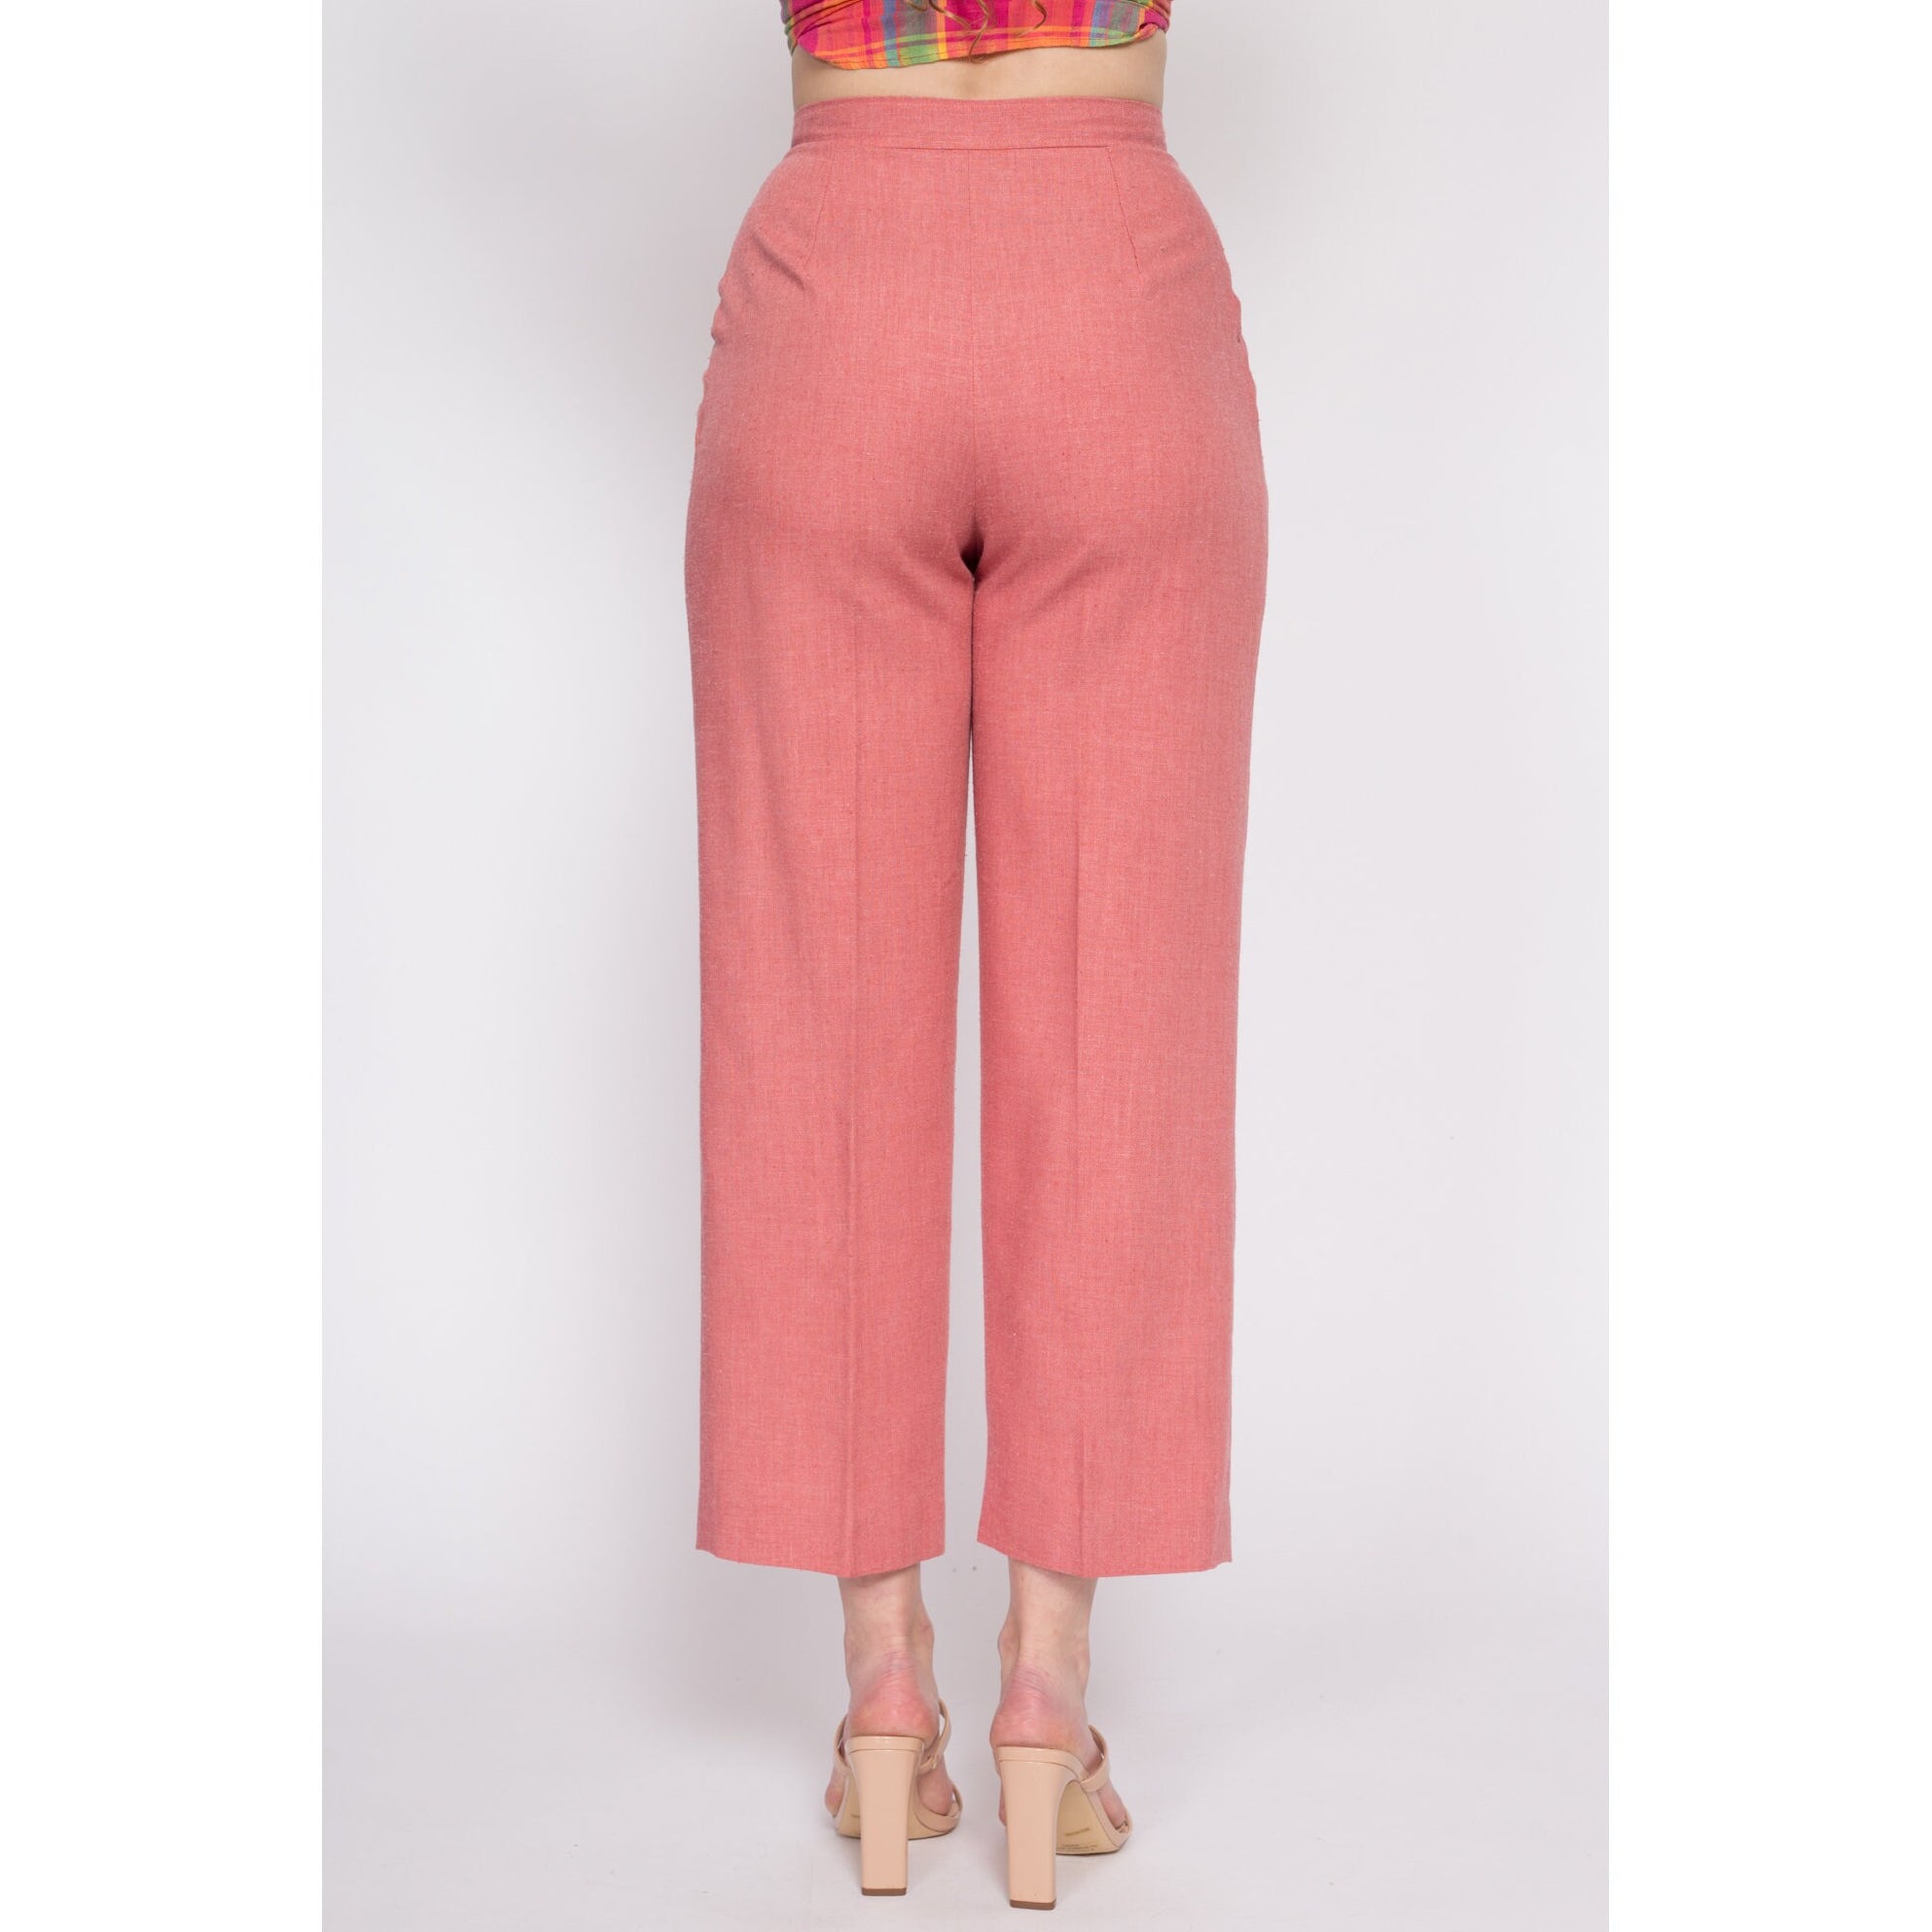 70s Dusty Pink High Waisted Trousers - Small, 26" | Vintage Pleated Tapered Leg Ankle Pants